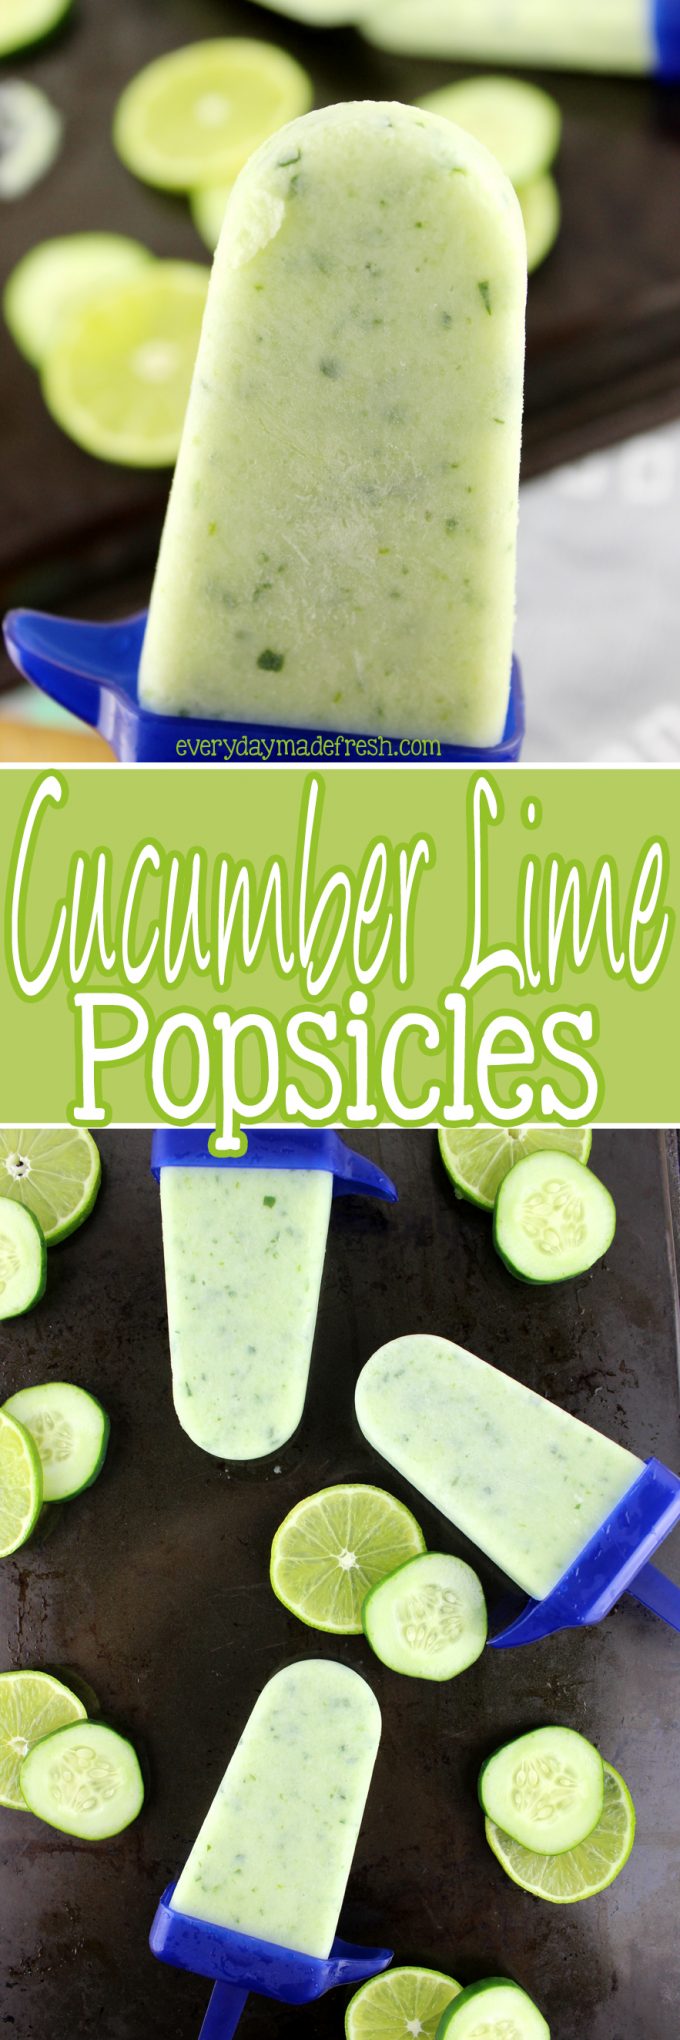 Summertime calls for refreshing popsicles, and nothing is more refreshing than these Cucumber Lime Popsicles! | EverydayMadeFresh.com